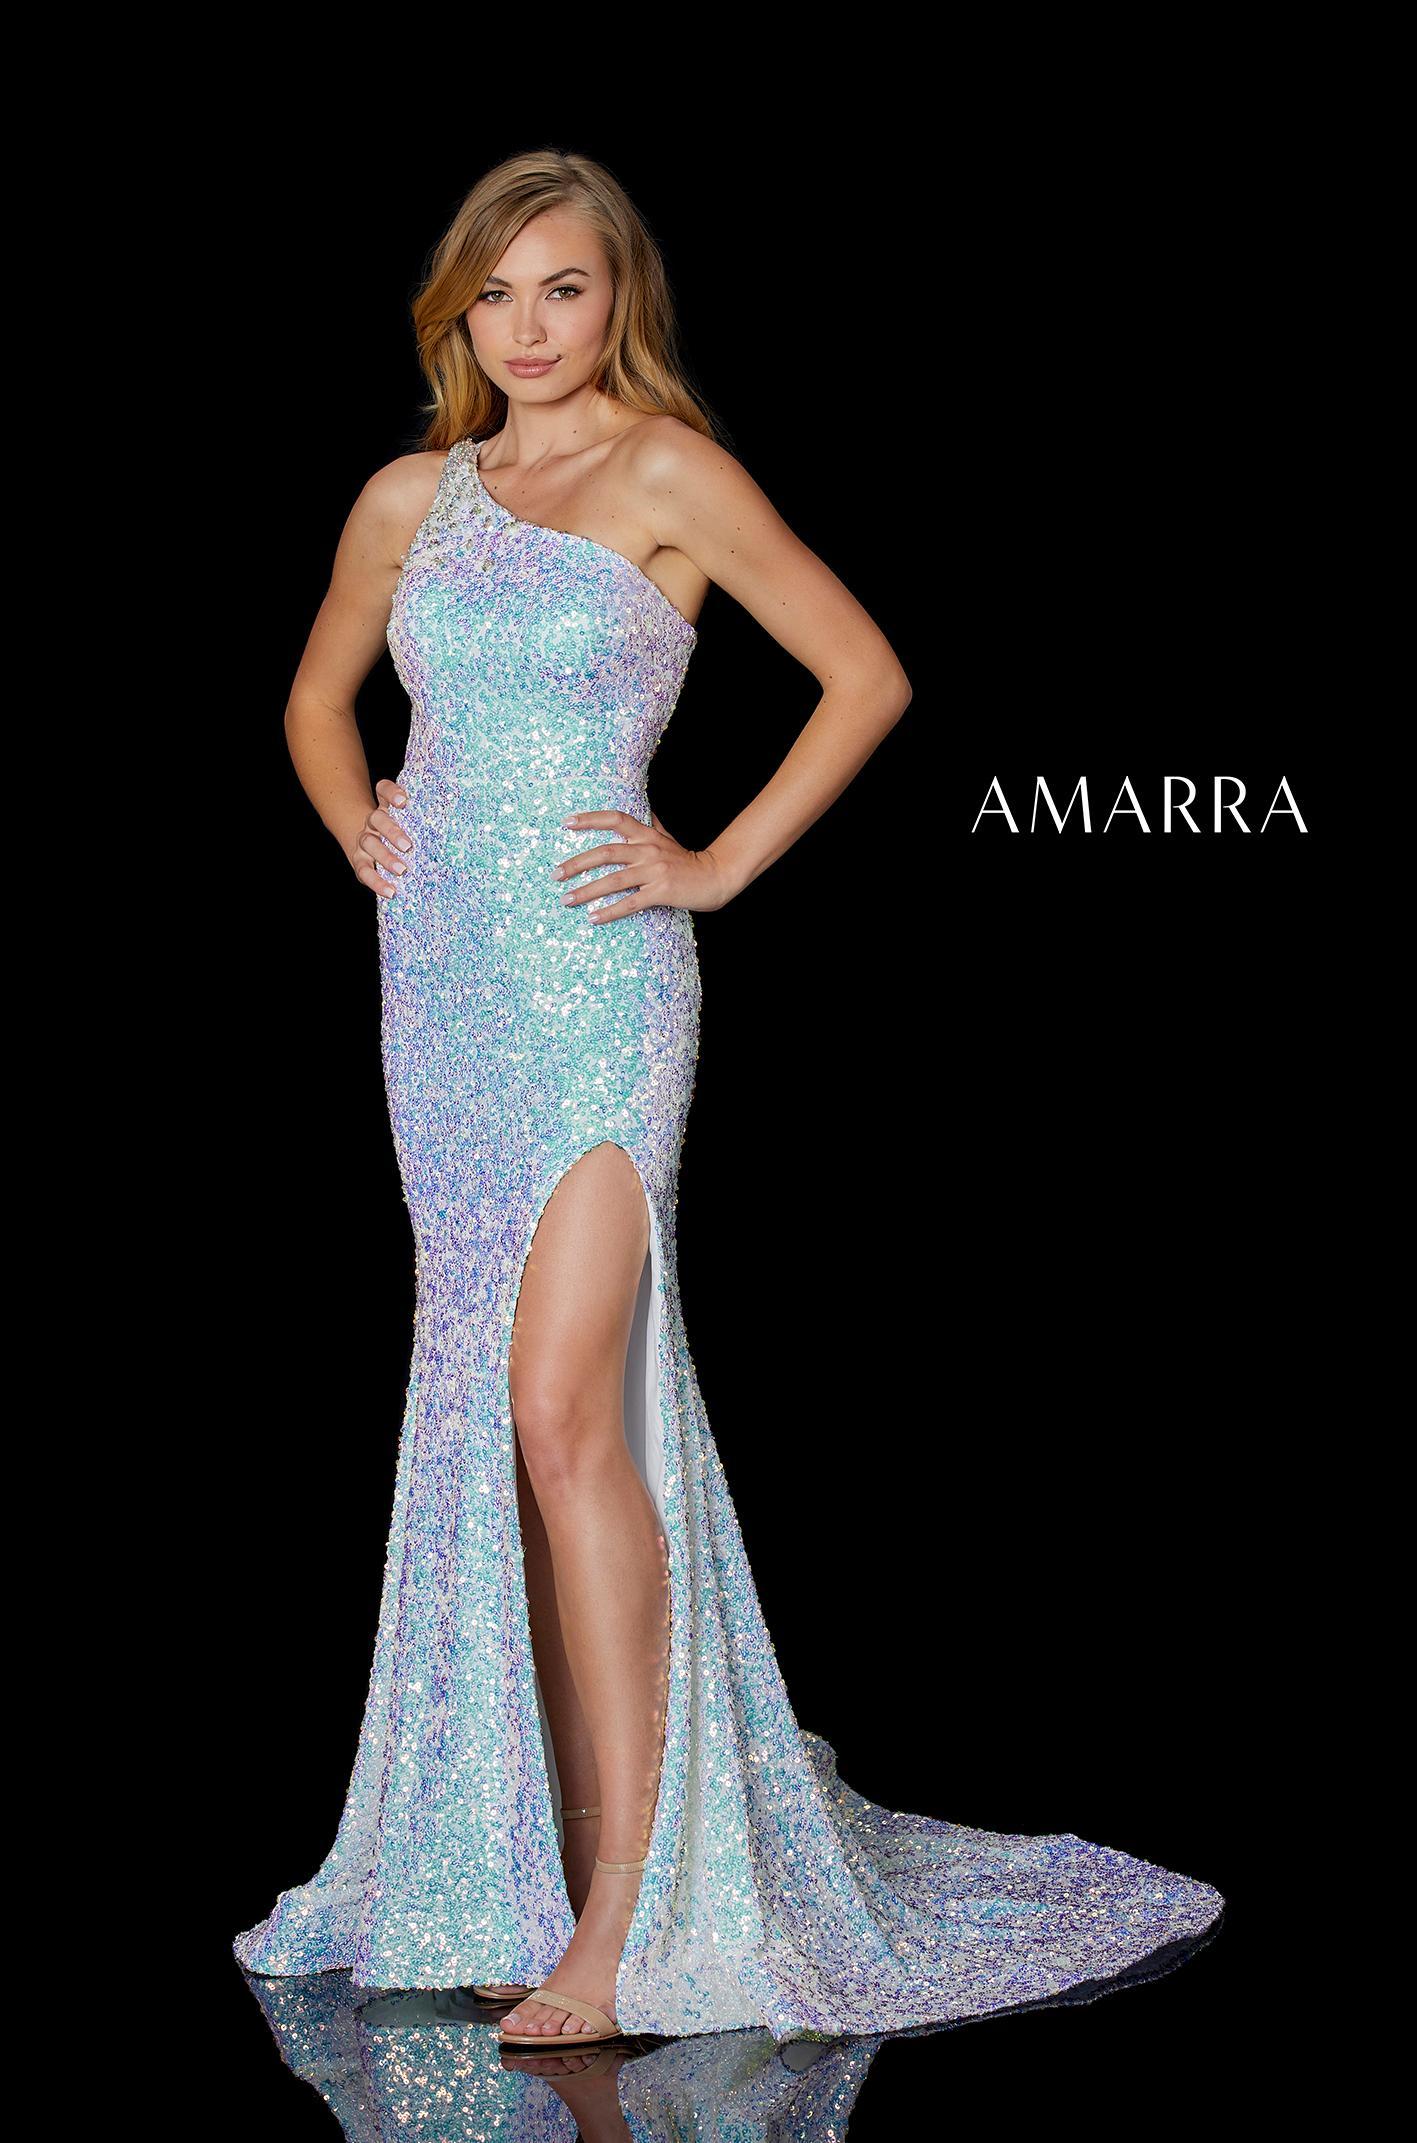 Amarra 87241 One Shoulder Sequin High Slit Open Corset Back Prom Dress Pageant Fitted one shoulder sequin gown featuring crystal beading on the straps, high leg slit, cut-out criss-cross back, and a sweep train.  Available Sizes: 00-16  Available Colors: Cotton Candy, Soft Pink